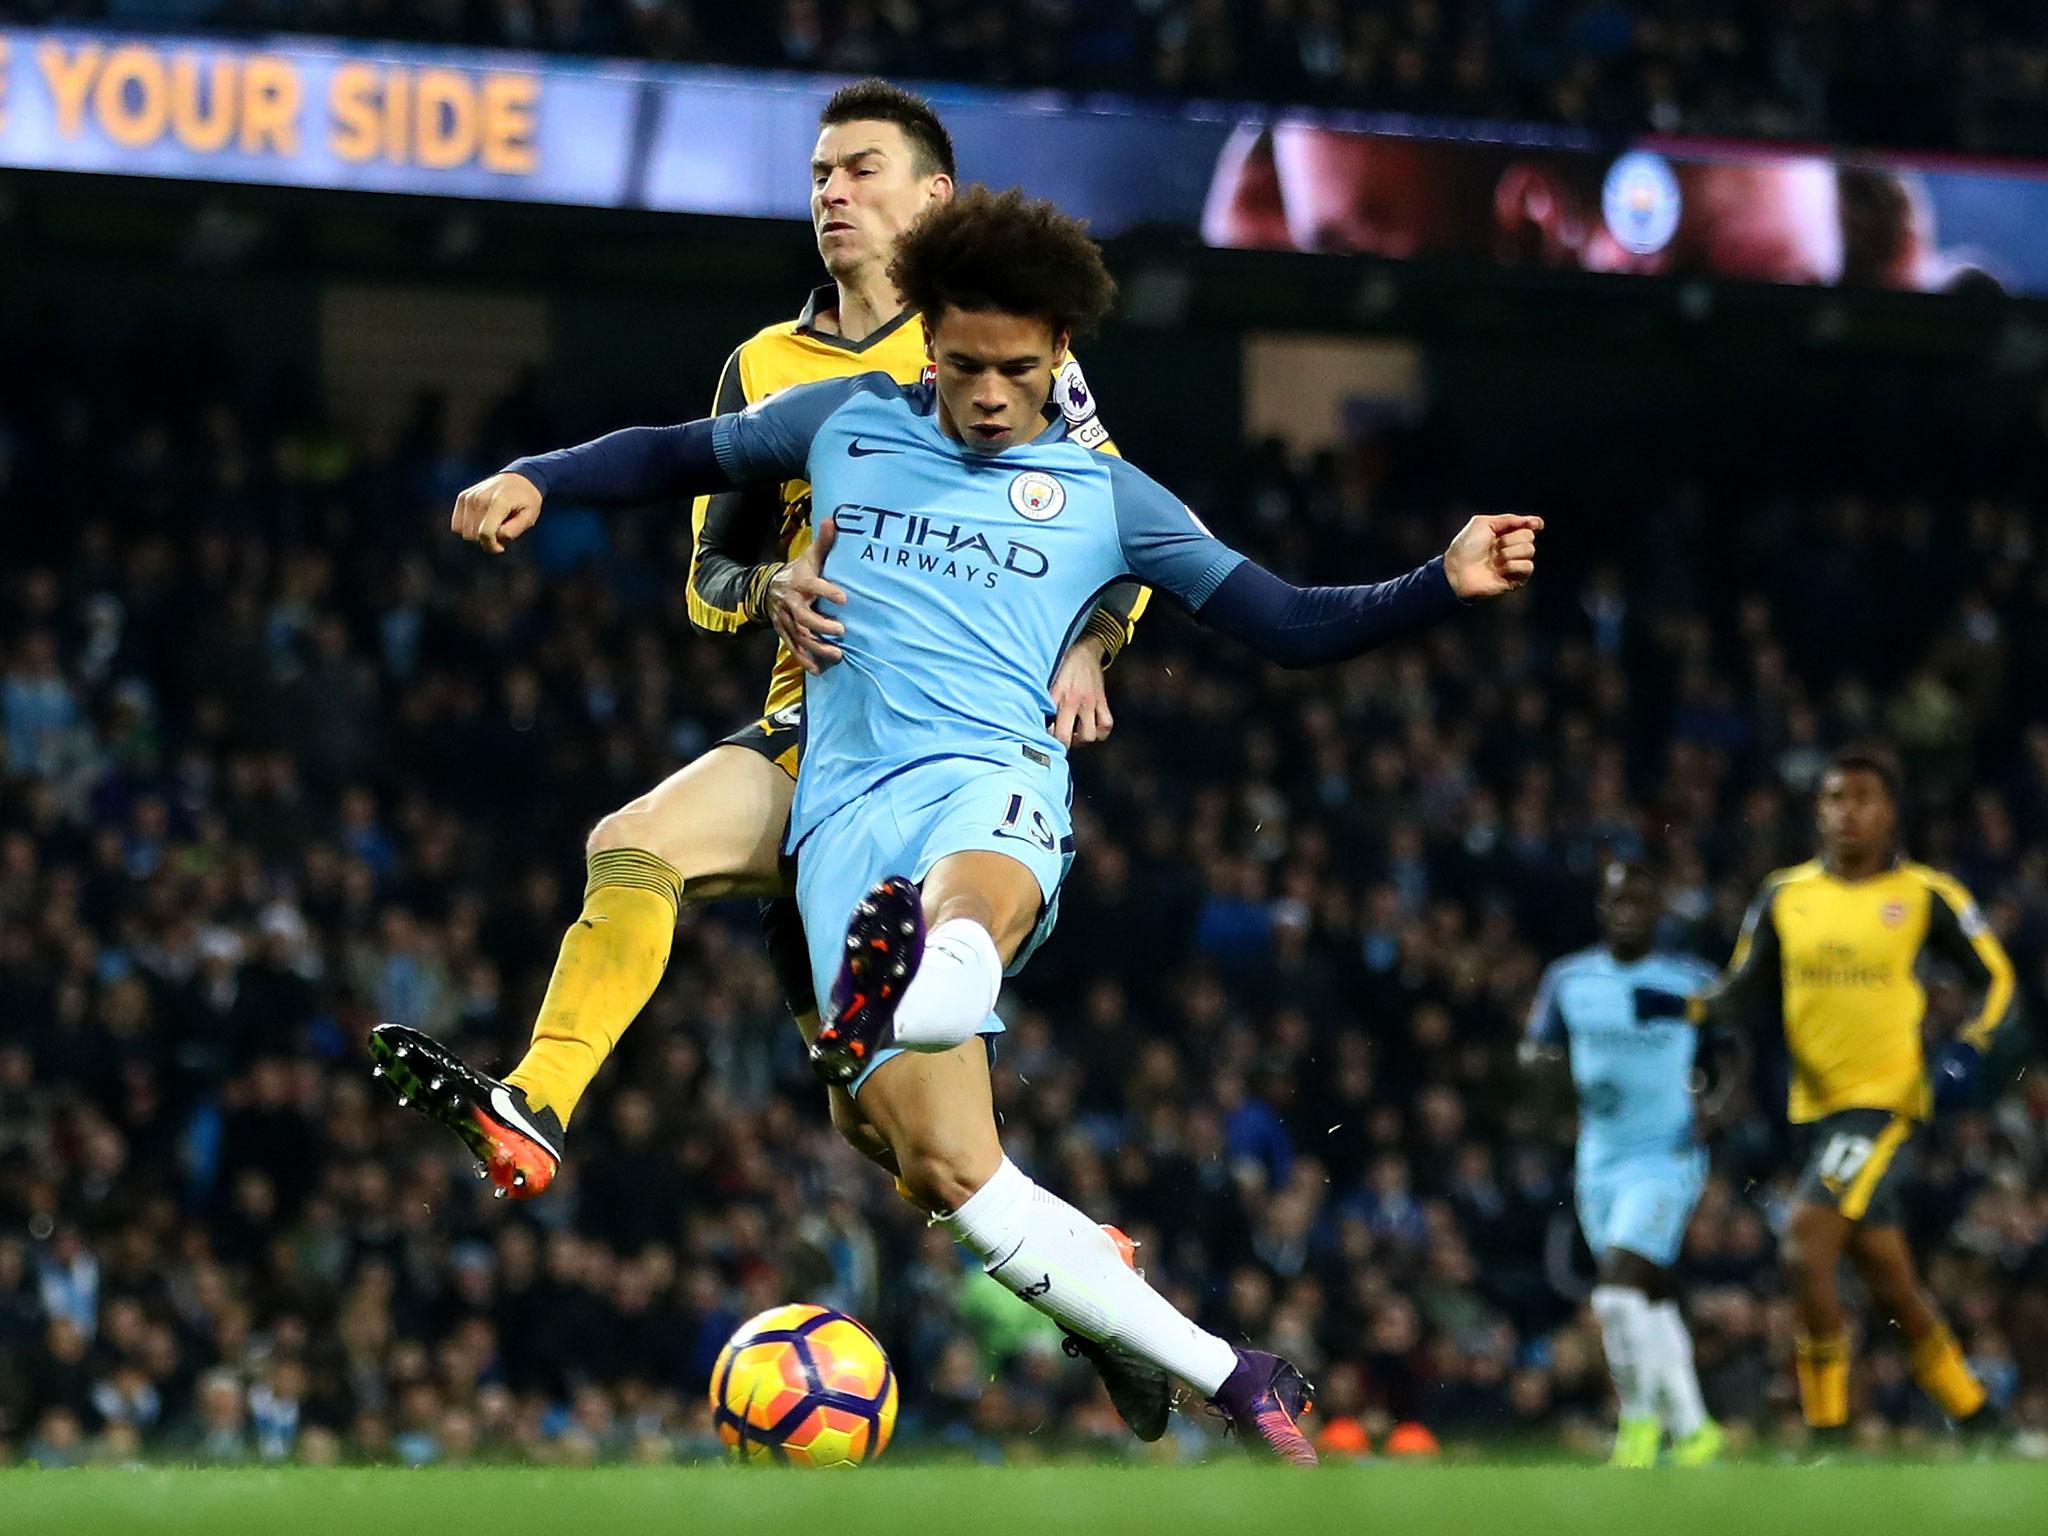 Sané may have been marginally offside but there was nothing wrong with his finish